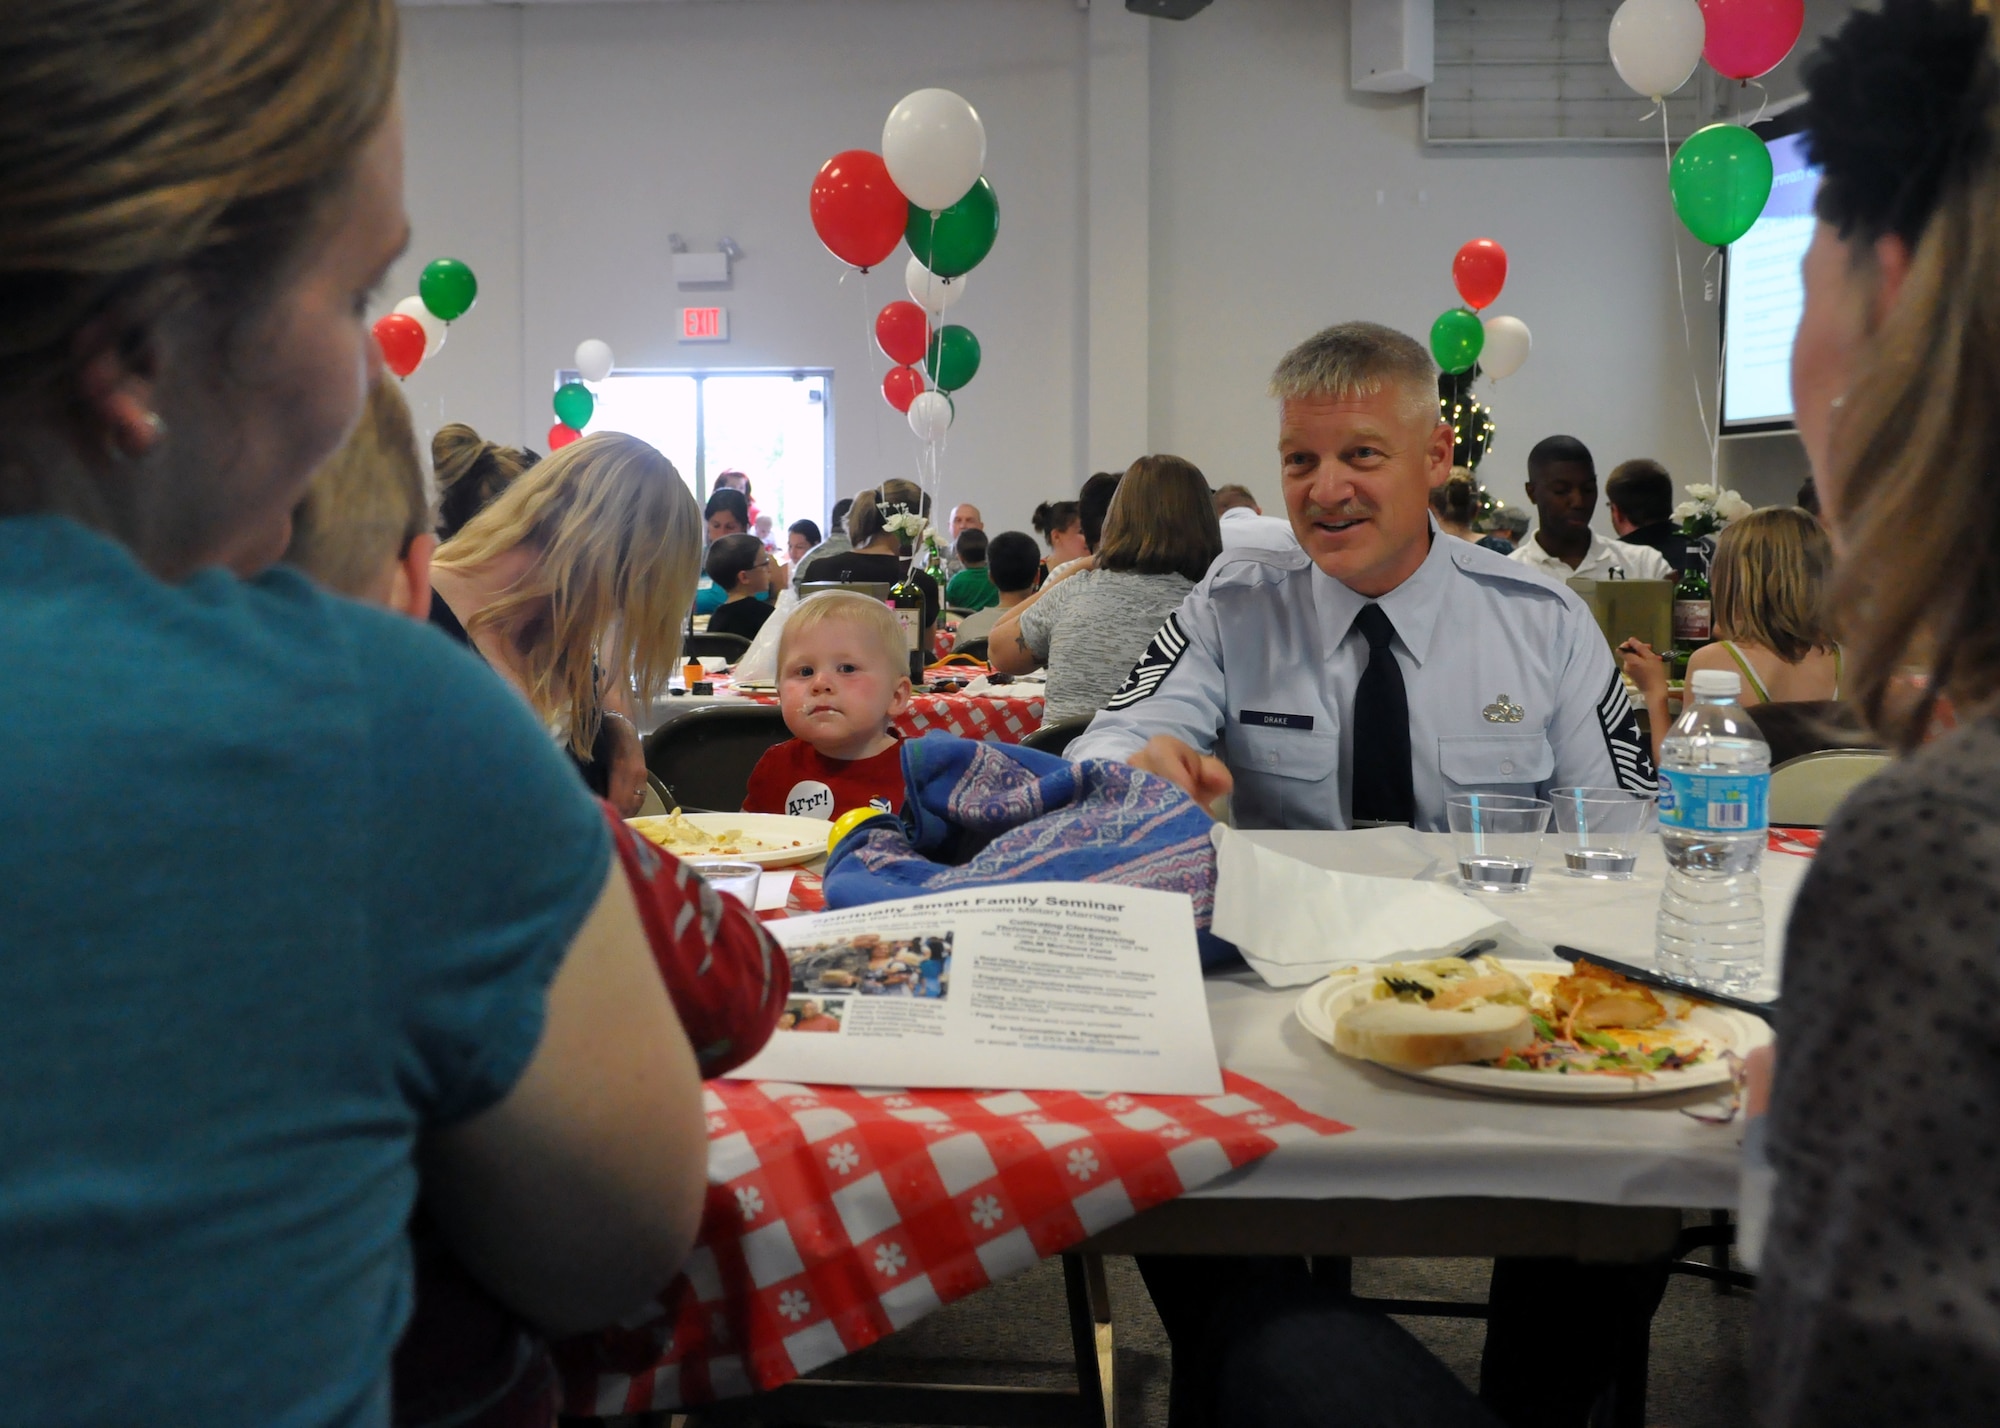 Chief Master Sgt. Gordon Drake, 62nd Airlift Wing command chief, speaks to a group of spouses at the quarterly Deployed Families Dinner June 11, 2012, at the McChord Field Chapel Support Center on Joint Base Lewis-McChord, Wash. Drake expressed his appreciation for hard-working spouses and emphasized the importance of a strong family. (U.S. Air Force photo/Senior Airman Leah Young)